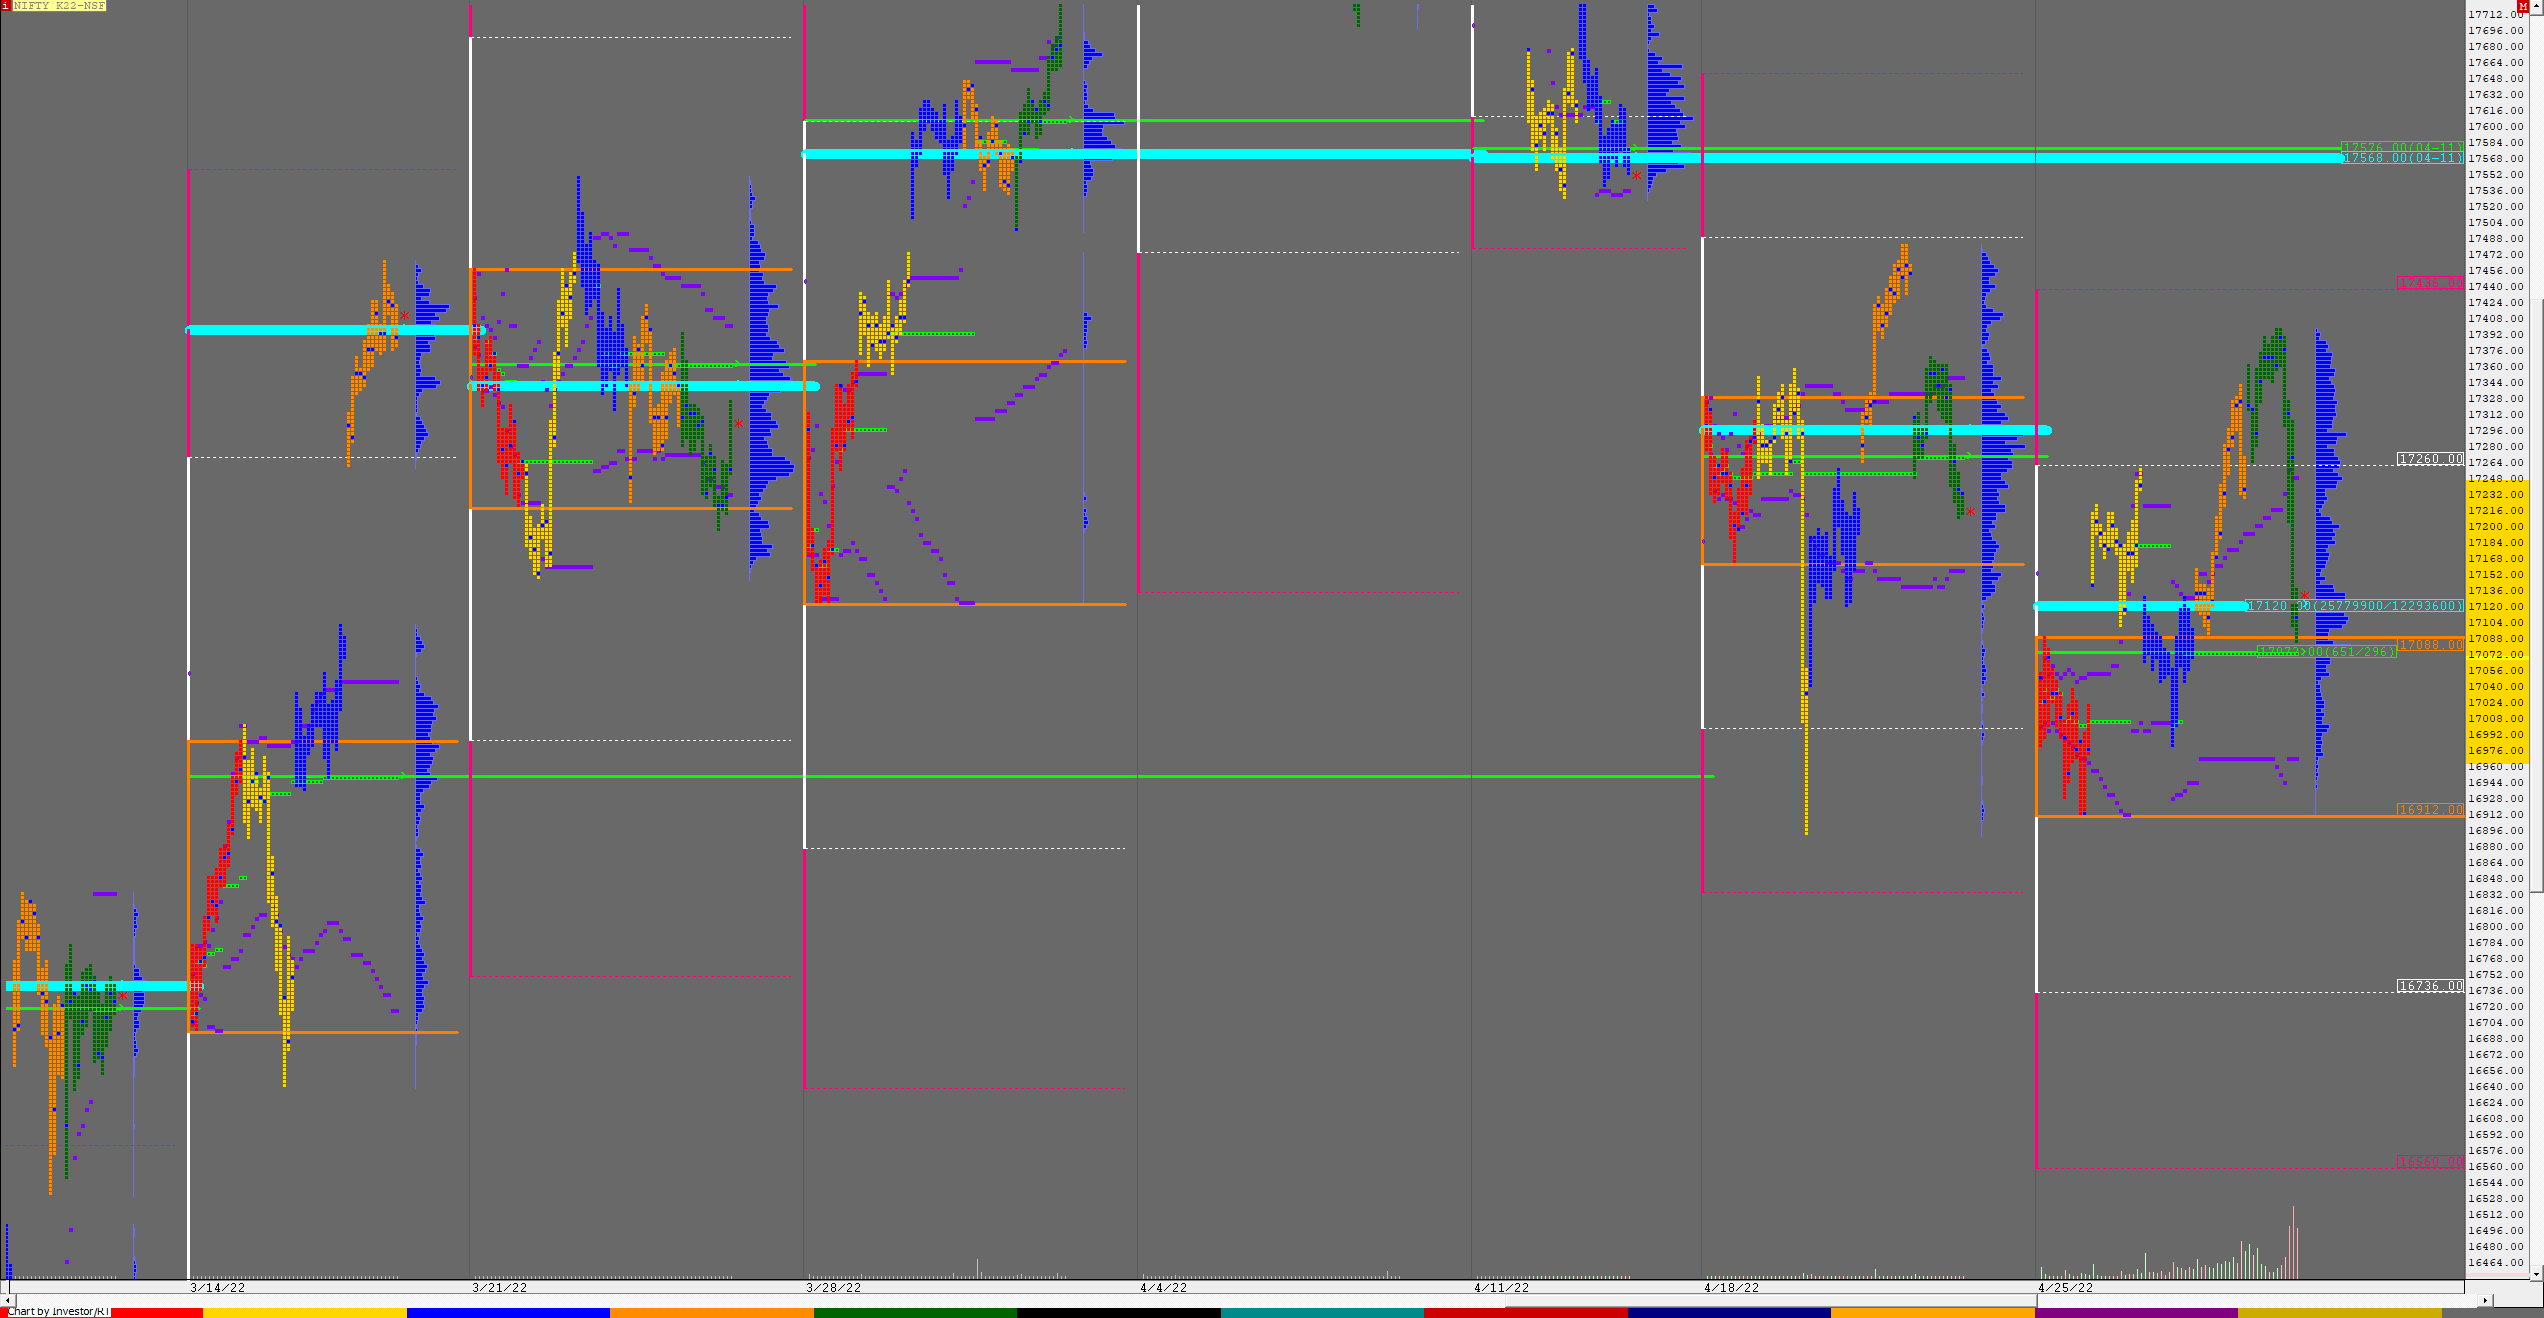 Nf F Weekly Charts (25Th To 29Th Apr 2022) And Market Profile Analysis Banknifty Futures, Charts, Day Trading, Intraday Trading, Intraday Trading Strategies, Market Profile, Market Profile Trading Strategies, Nifty Futures, Order Flow Analysis, Support And Resistance, Technical Analysis, Trading Strategies, Volume Profile Trading